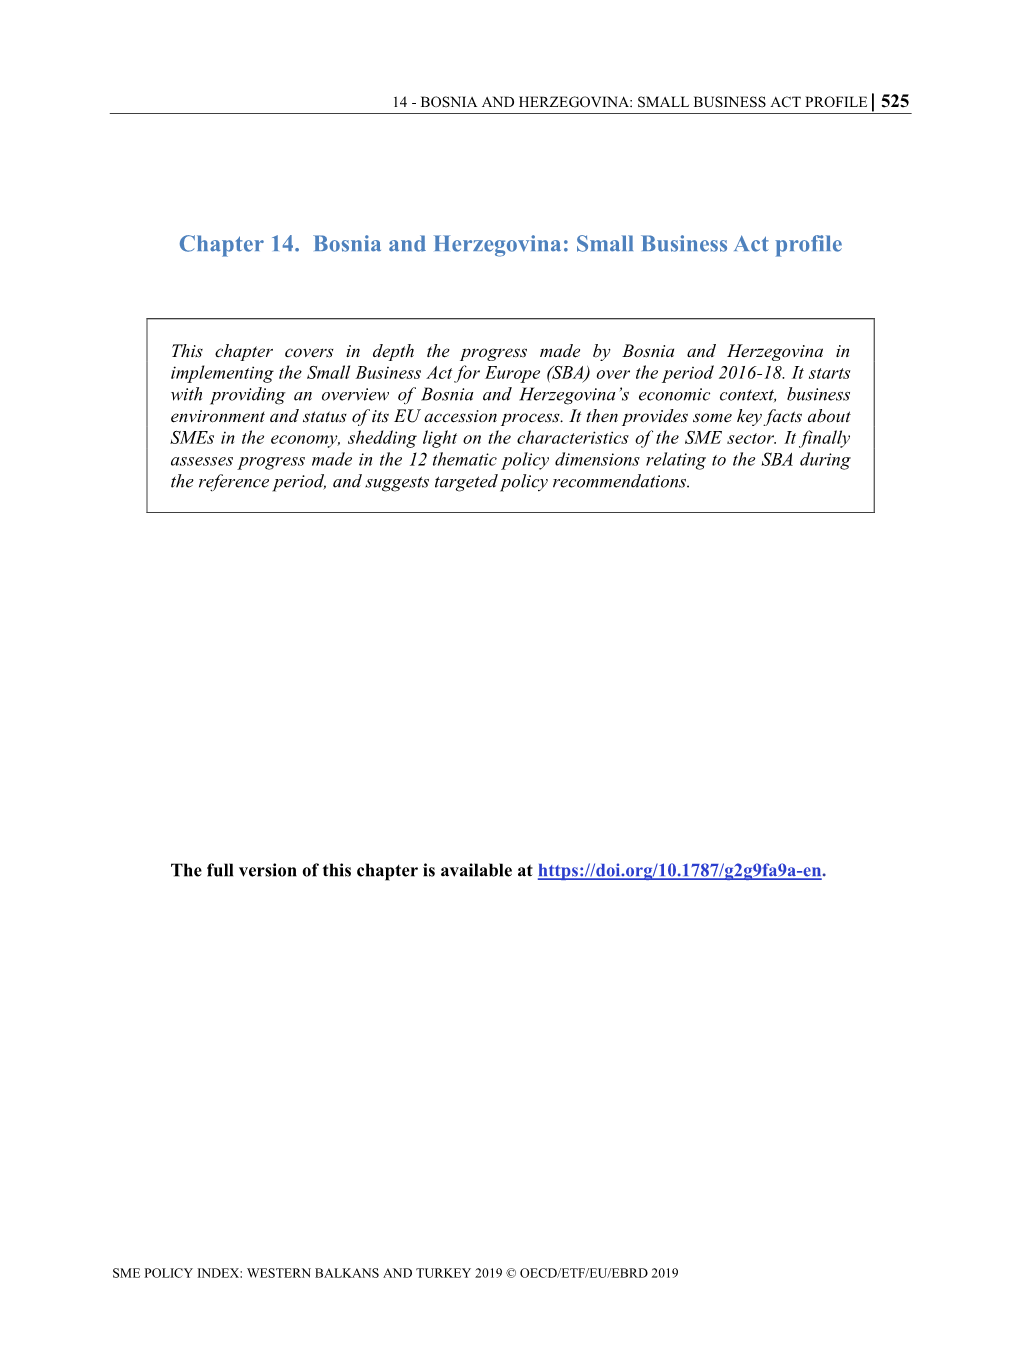 Chapter 14. Bosnia and Herzegovina: Small Business Act Profile